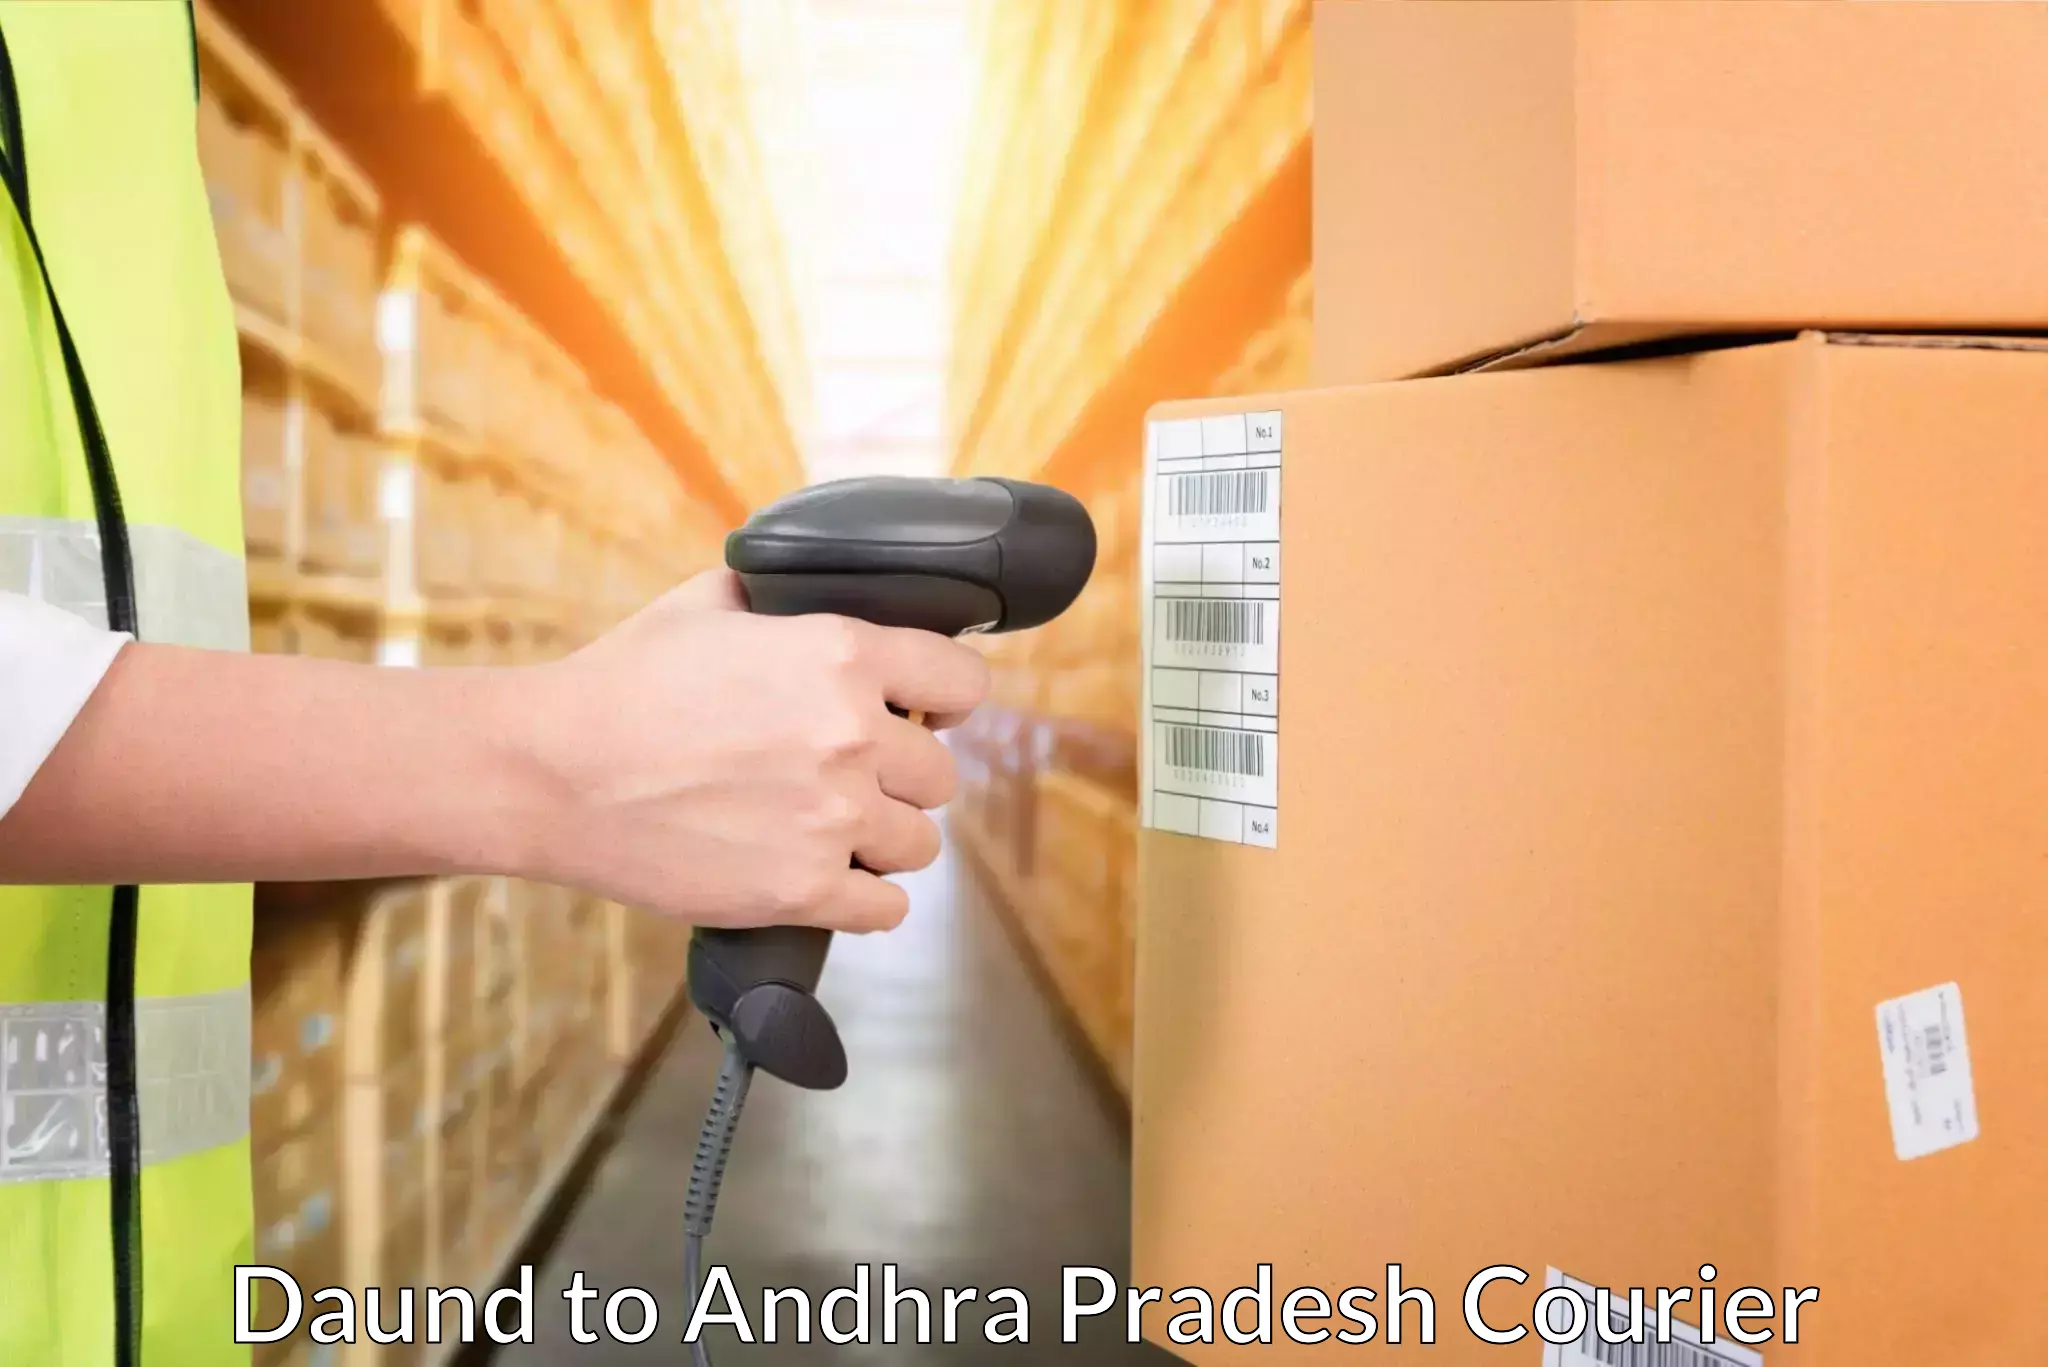 Global courier networks Daund to Andhra Pradesh